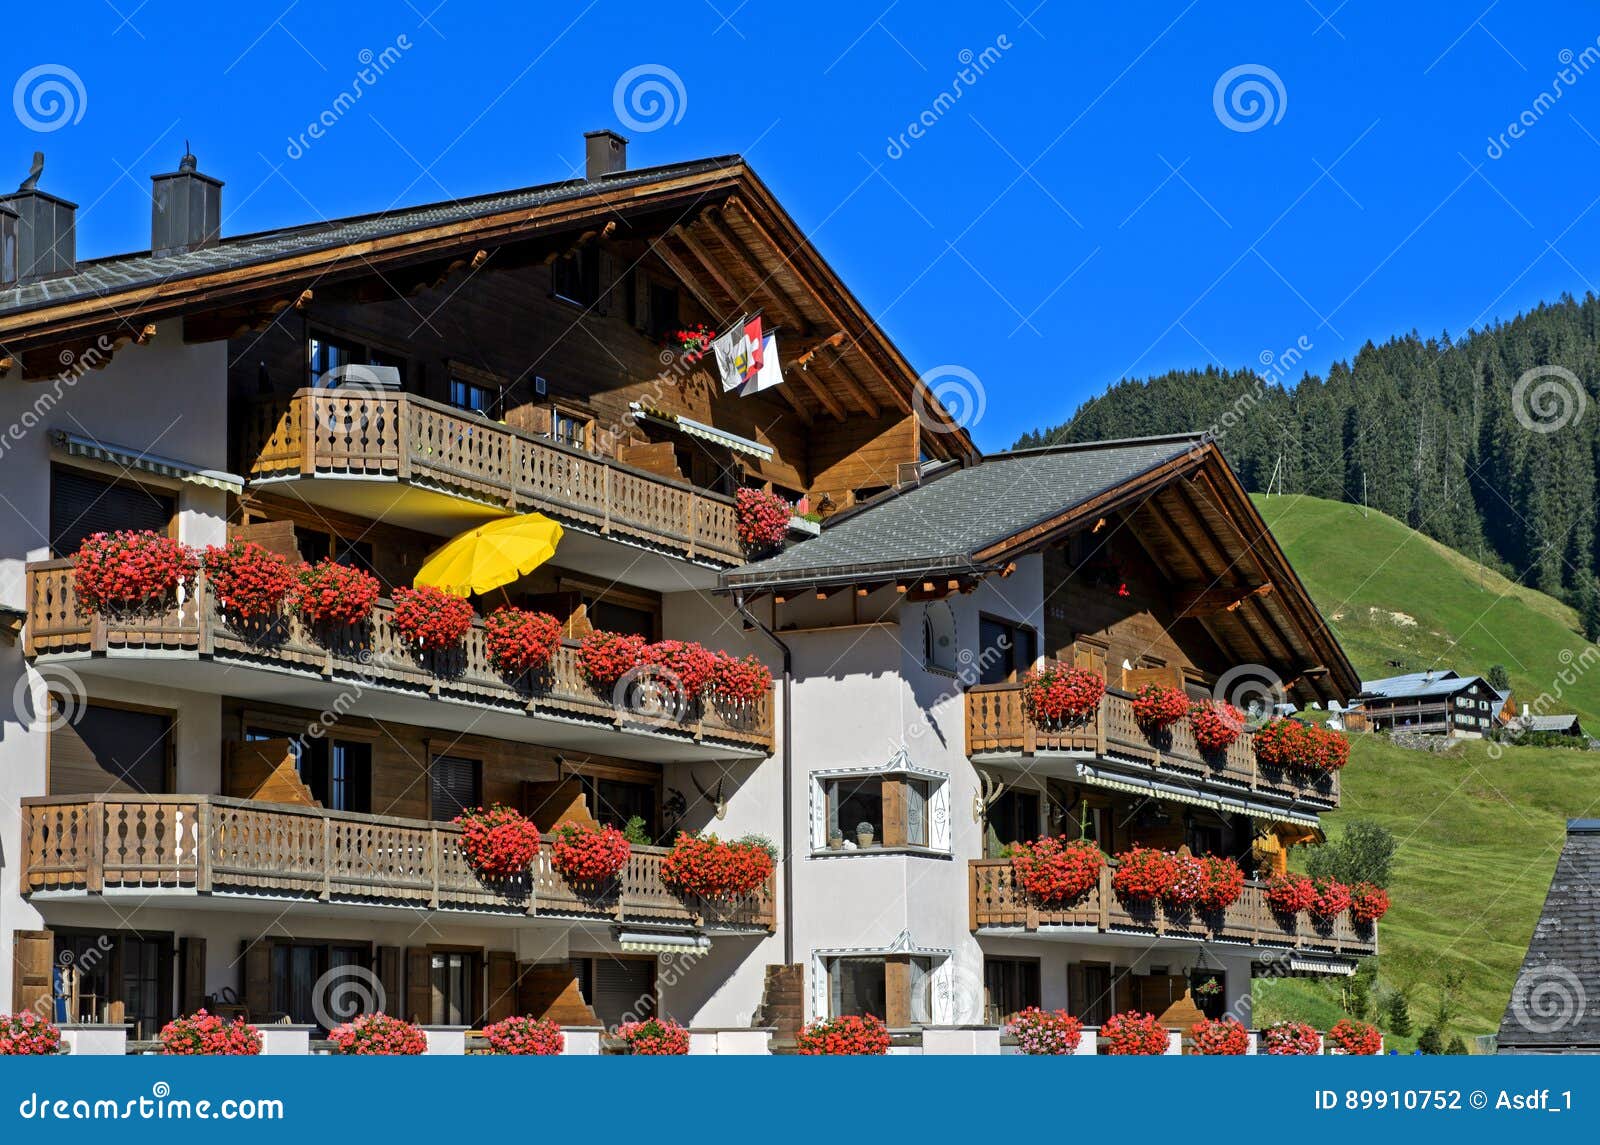 house with red geraniums on the balconies